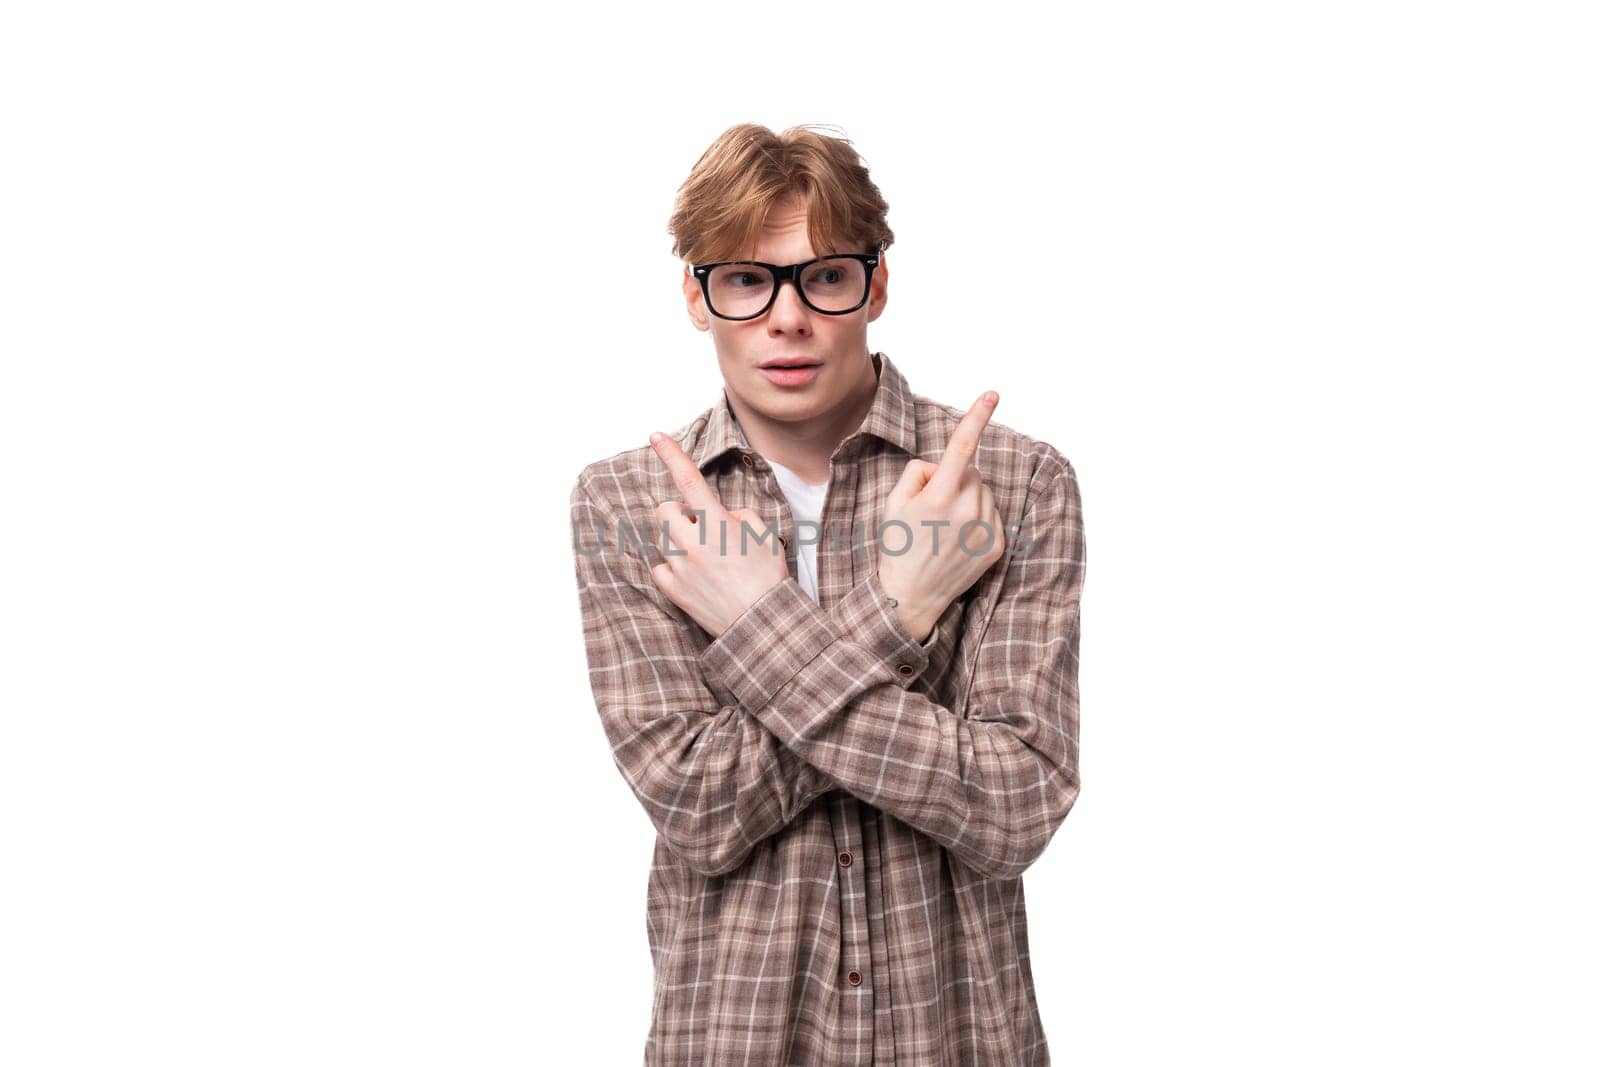 young european promoter man with golden hair in glasses and a shirt gesturing on a white background.